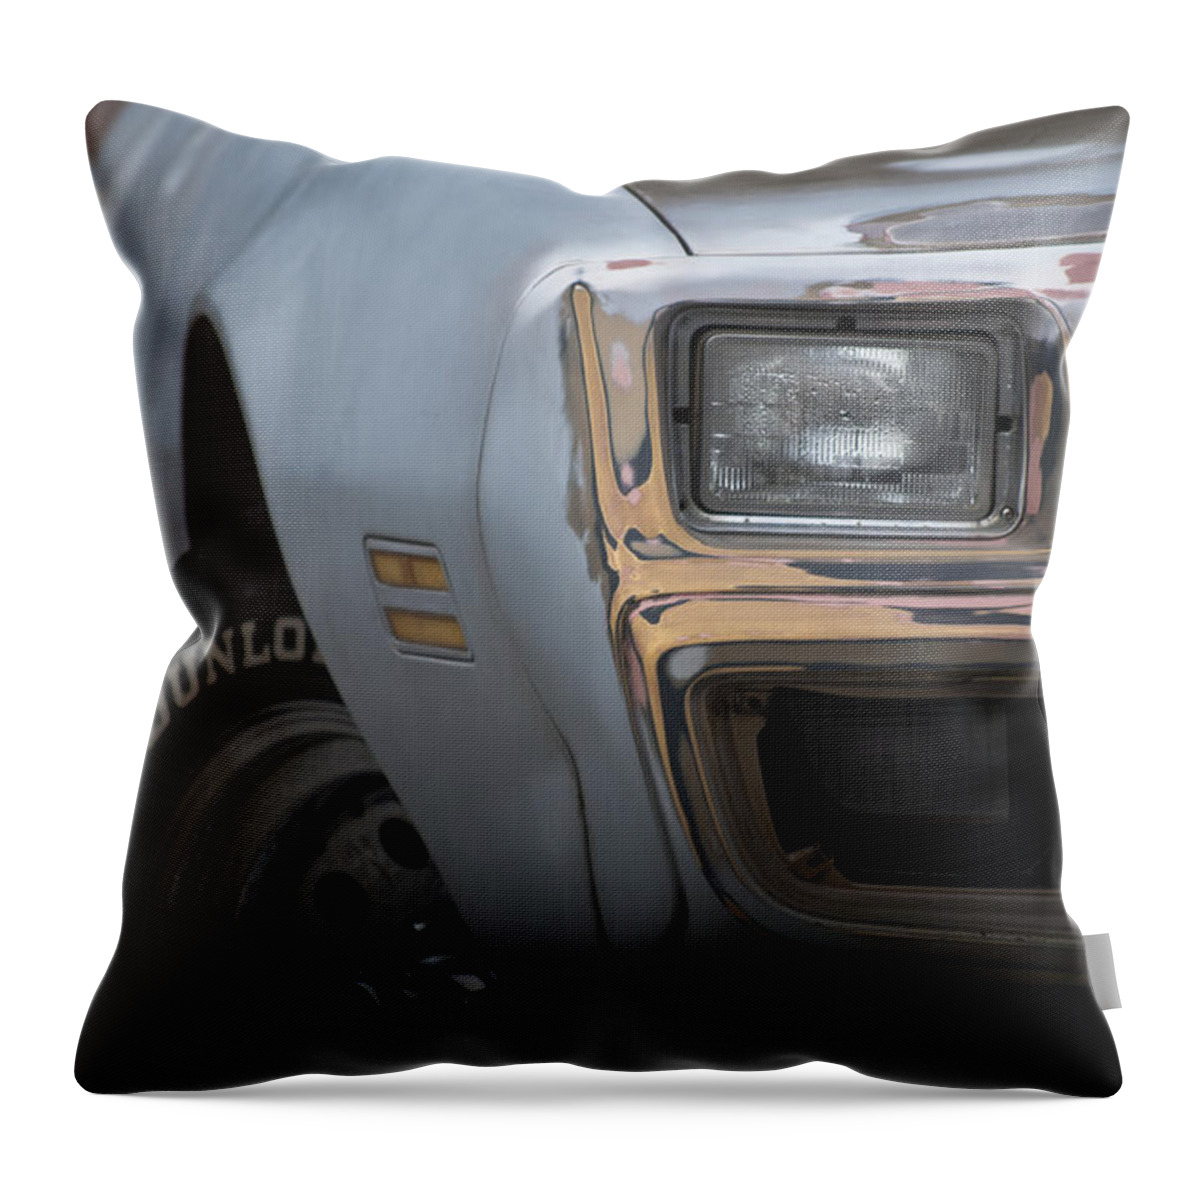 Car Muscle Musclecar Vintage Headlights Pastel Weathered Old Rusty Beat Up Tires Dunlop Rims Throw Pillow featuring the photograph Trans Am by Matthew Fralick